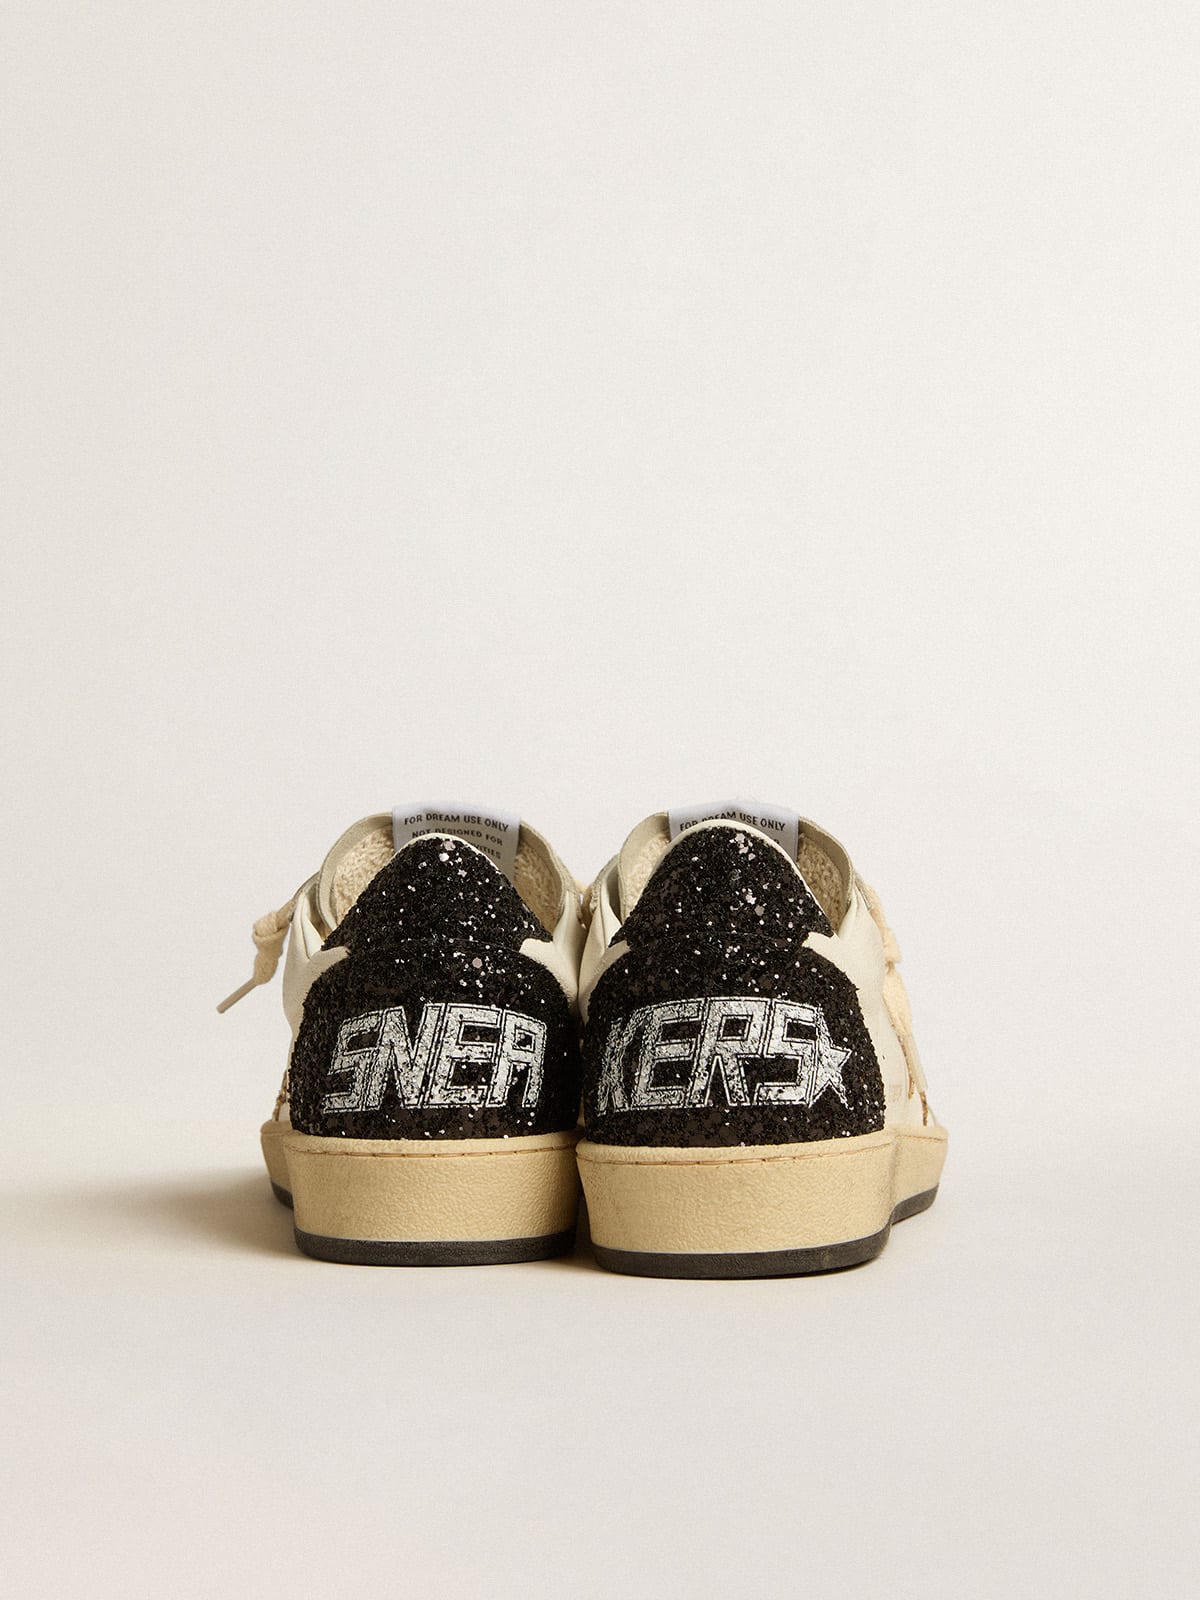 Golden Goose - Ball Star LTD in nappa leather and suede with glitter star and black heel tab in 